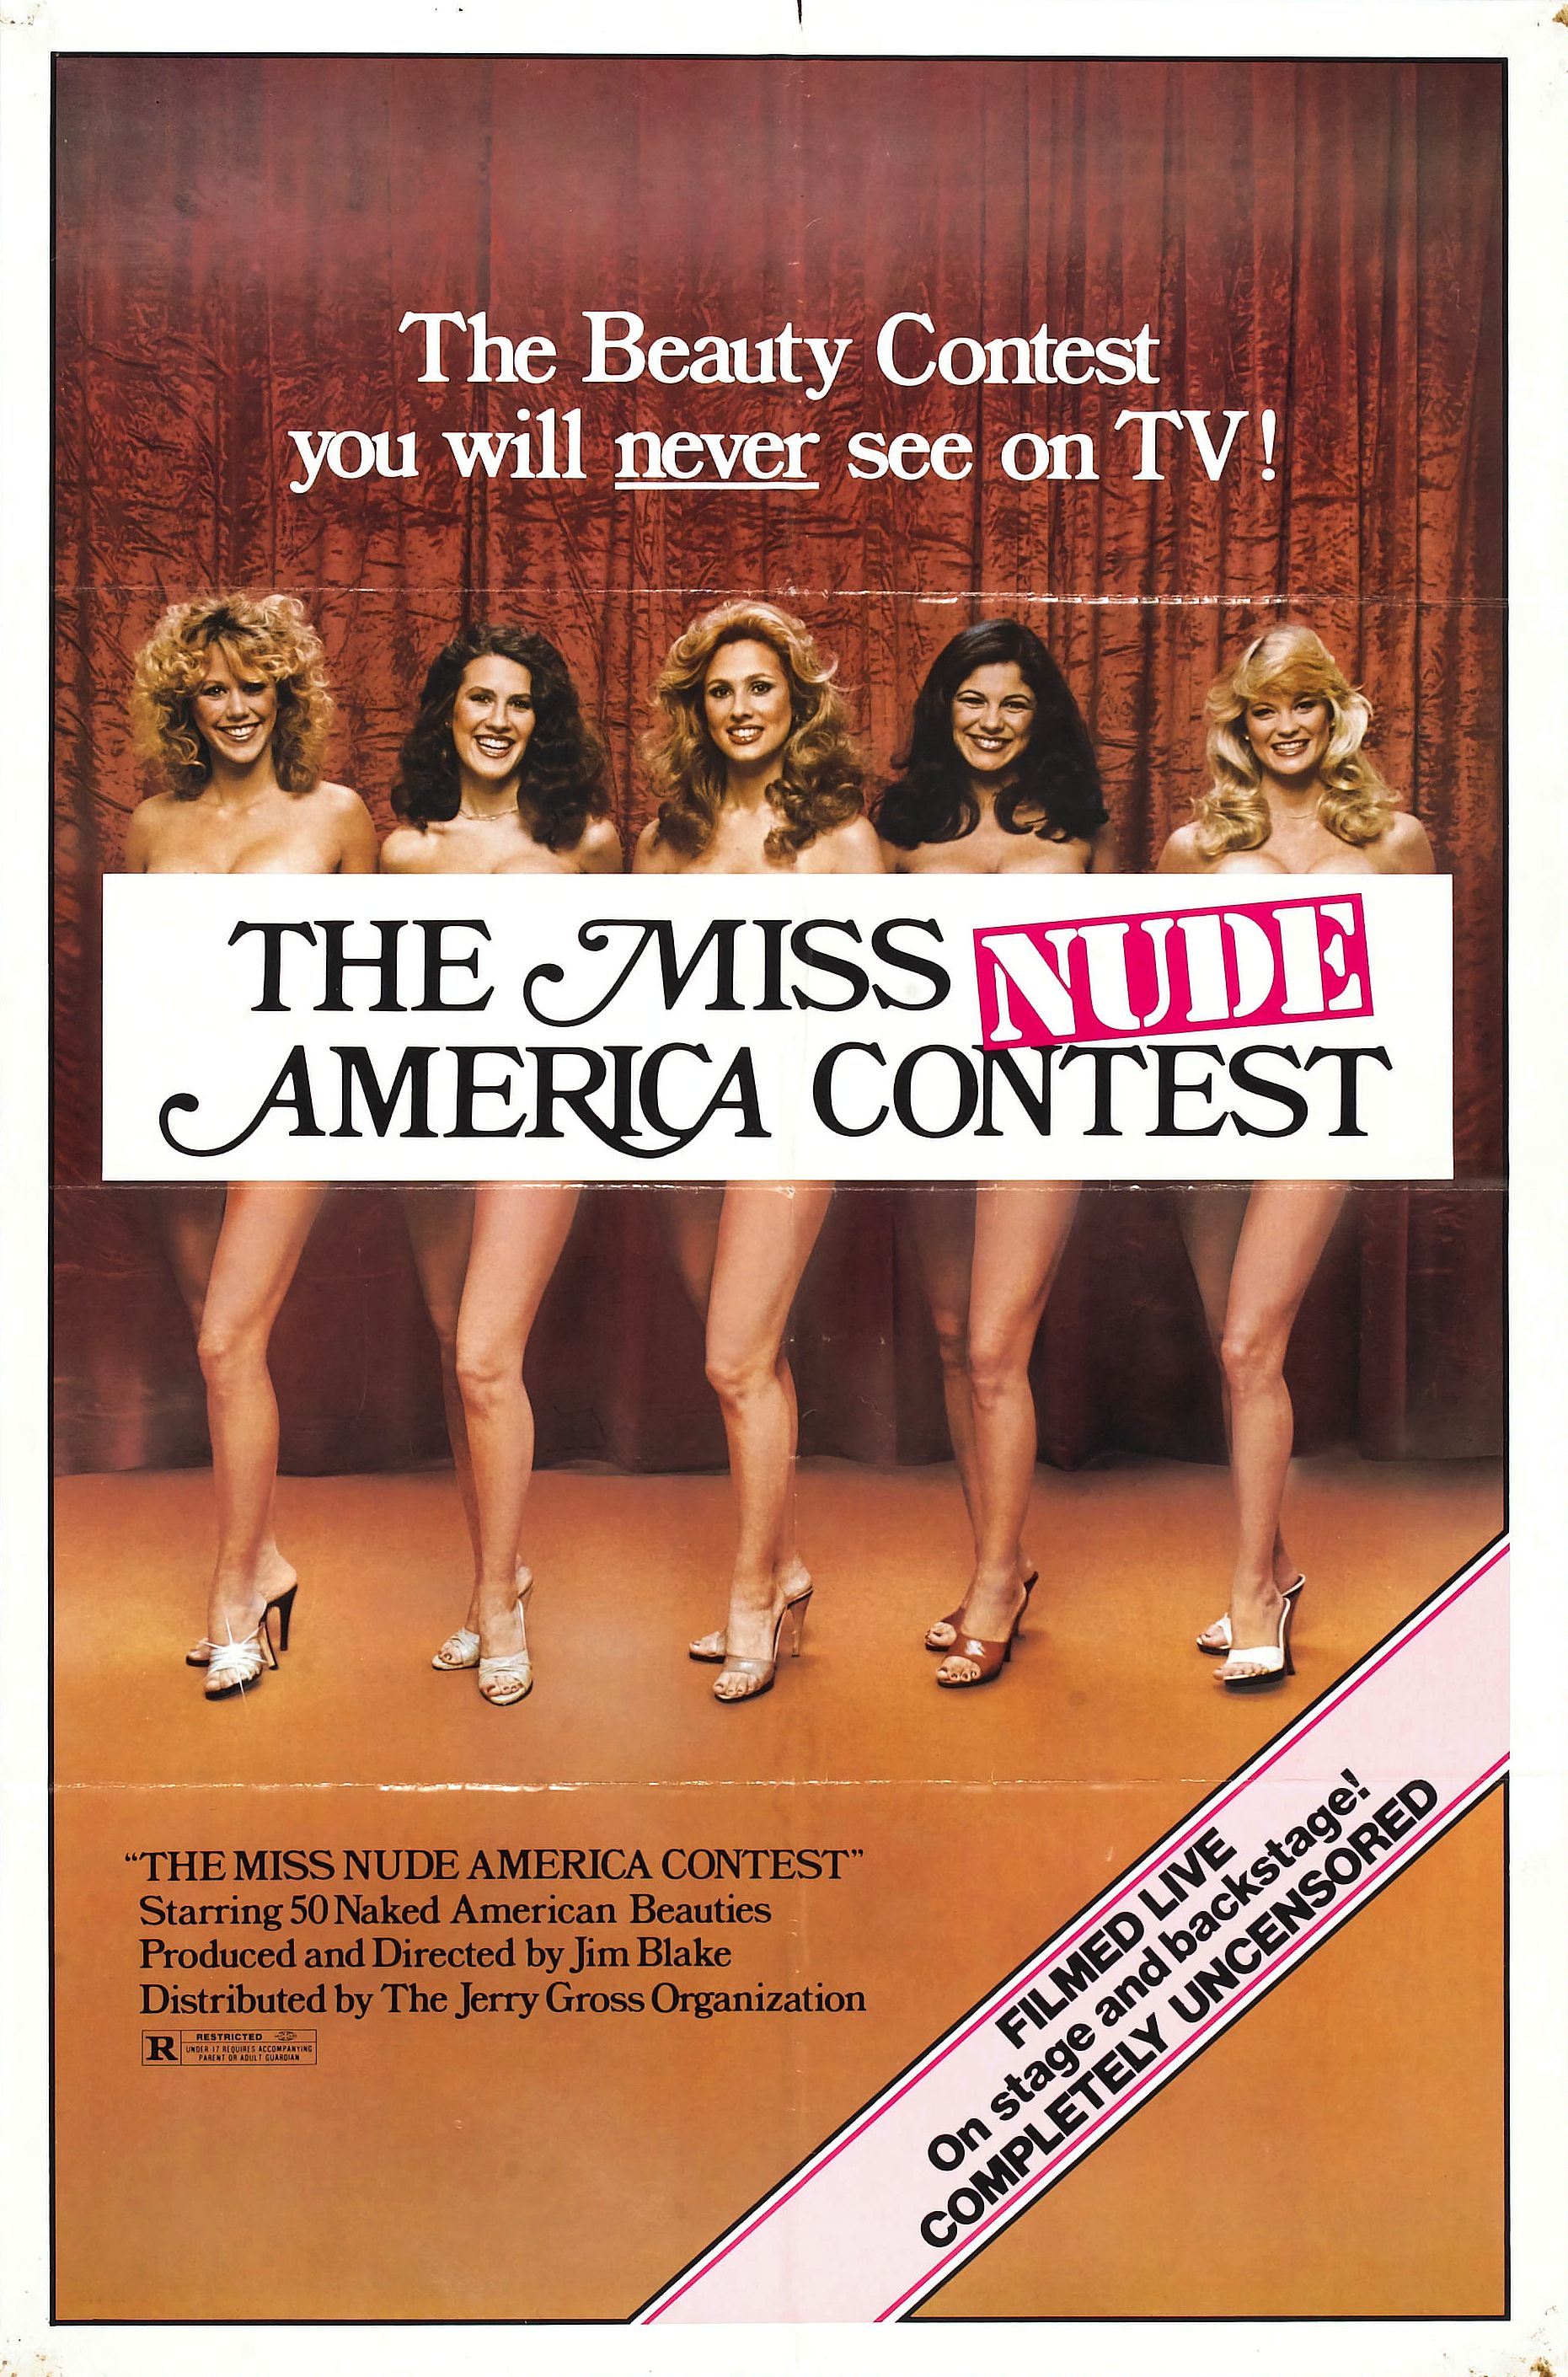 bruce b miller recommends Naked Miss America